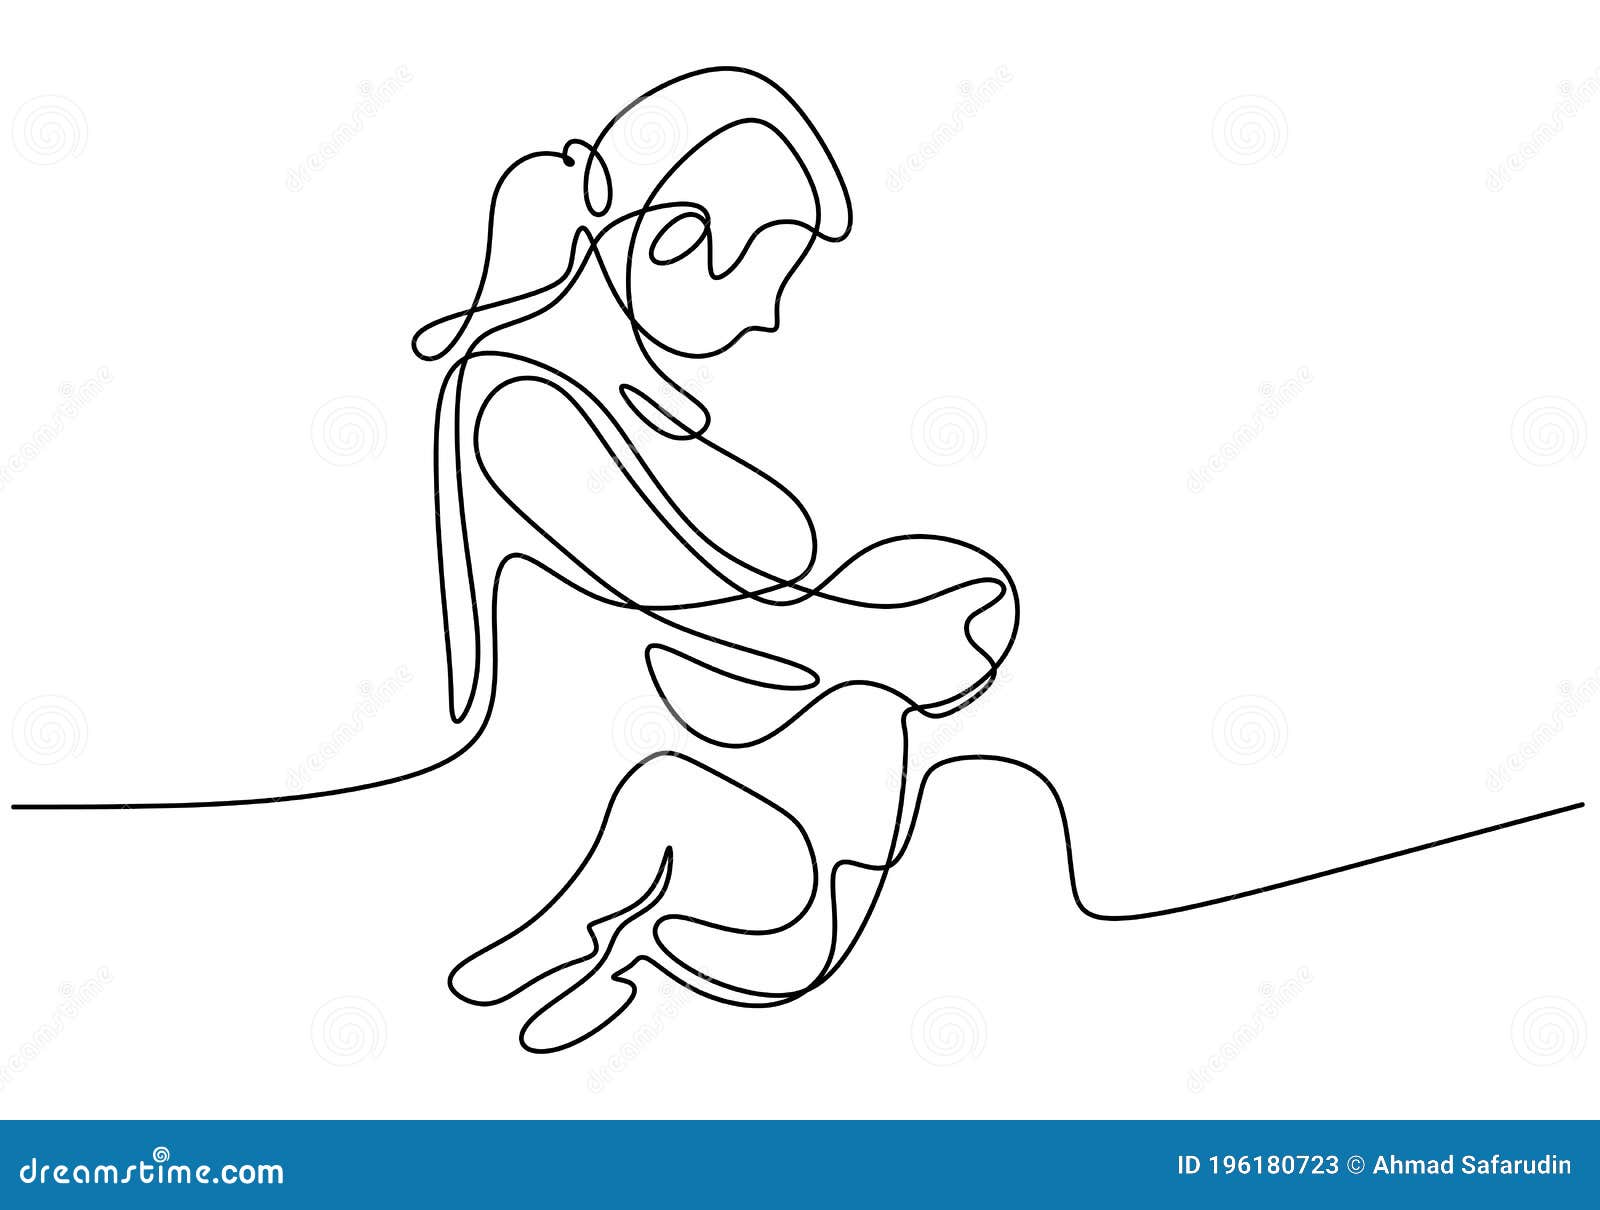 Happy World Breastfeeding Day. One Continuous Line Drawing of Mother